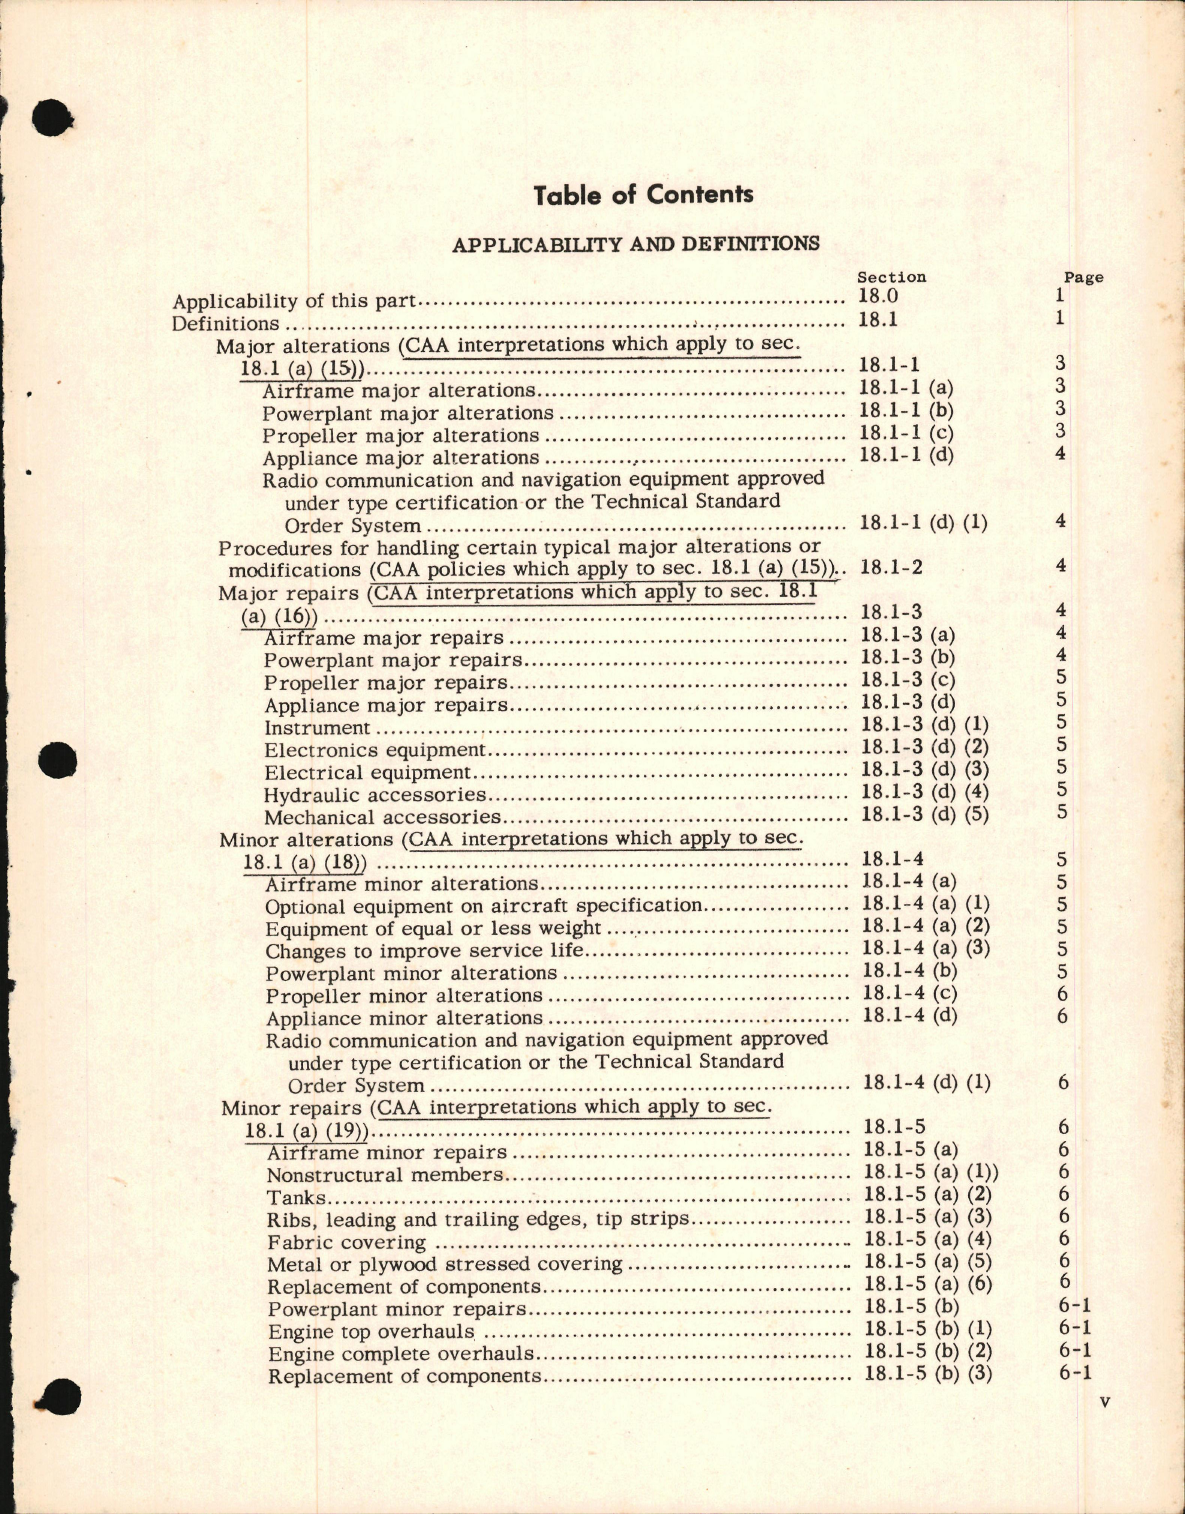 Sample page 7 from AirCorps Library document: Maintenance, Repair, and Alteration of Airframes, Powerplants, Propellers, and Appliances